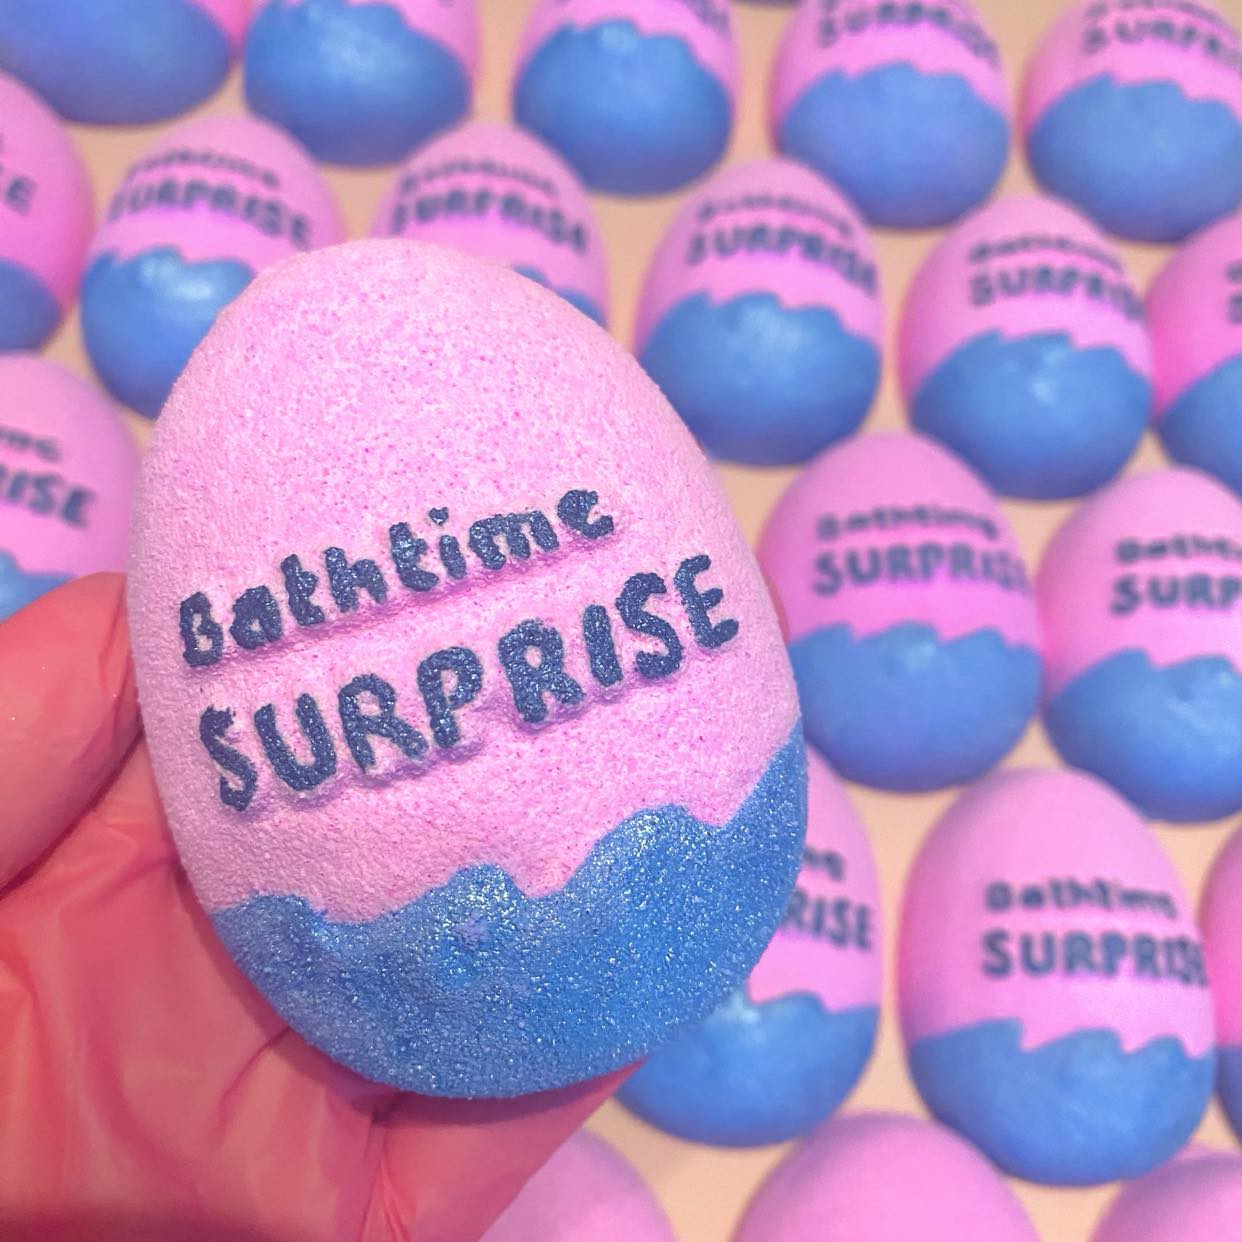 Bathtime Surprise Bath Bomb With Embeds Approx. 160g